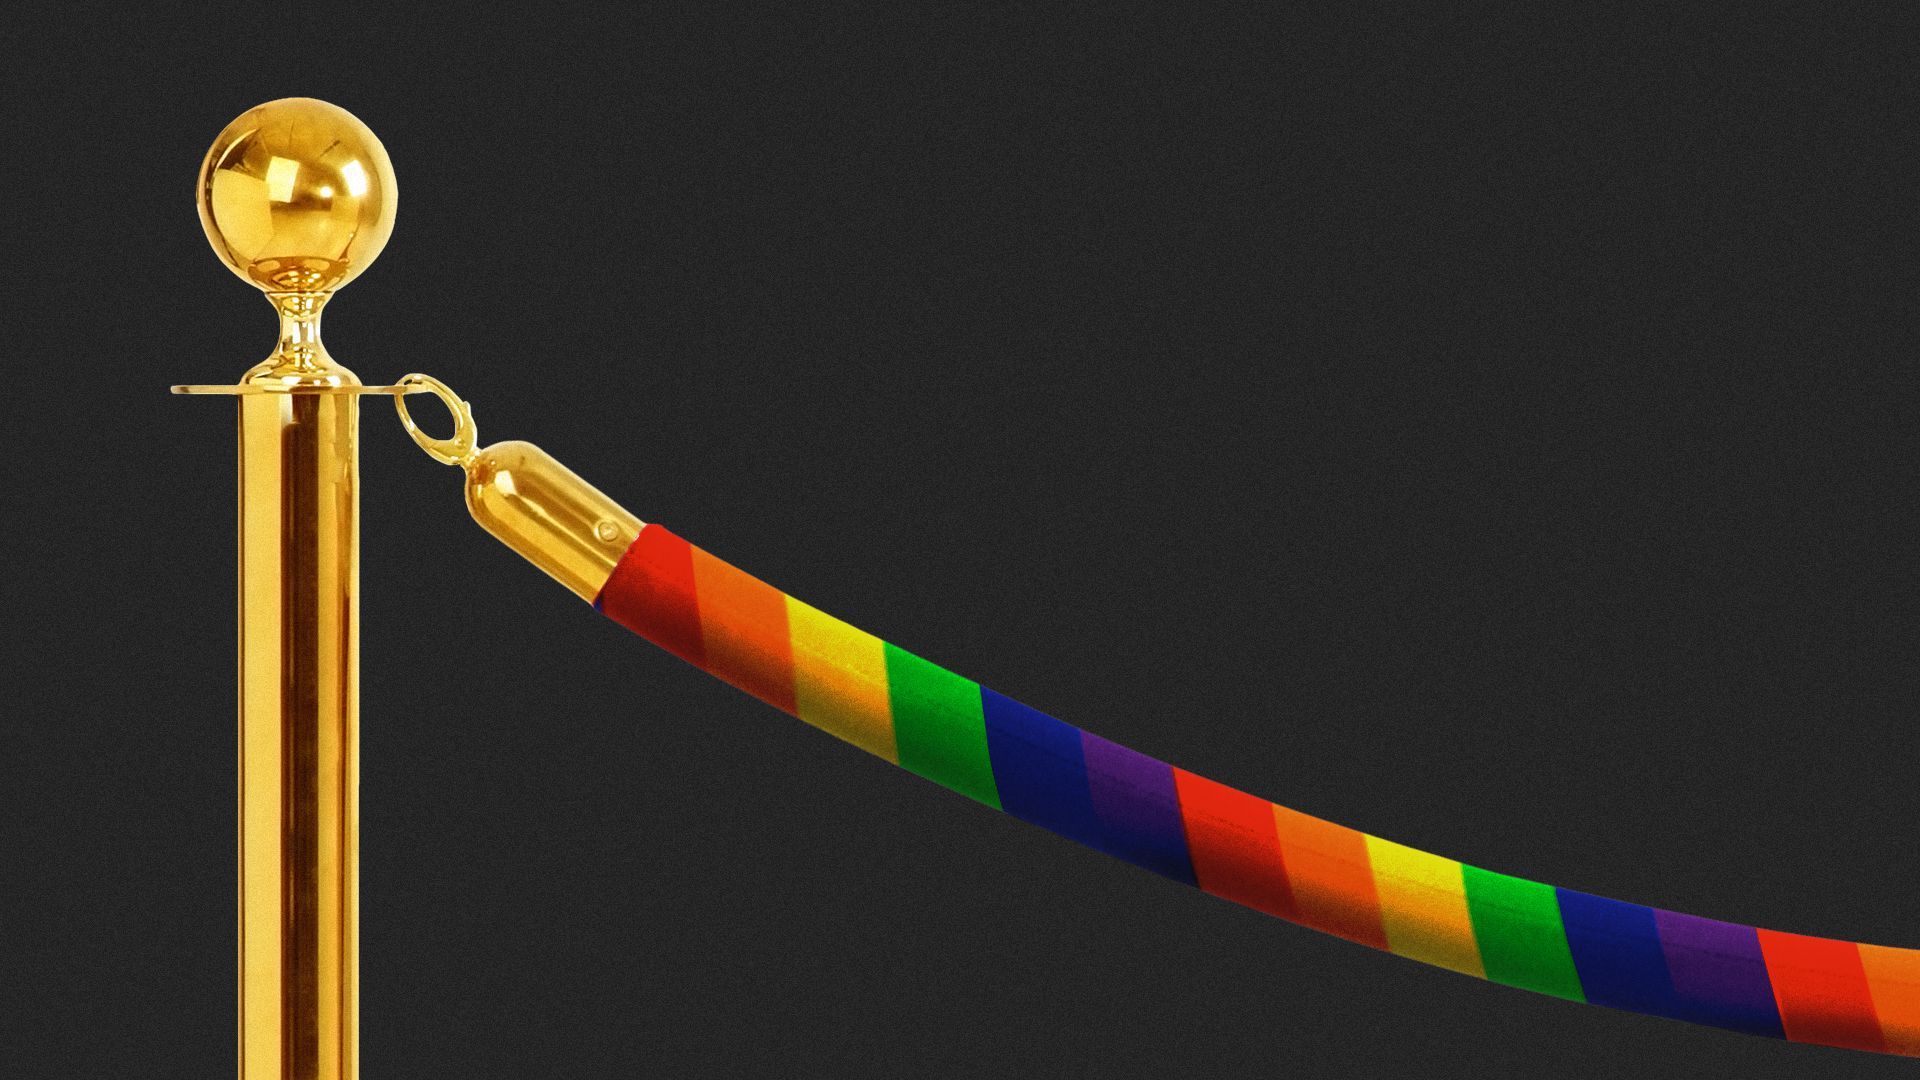 Illustration of a velvet rope wrapped in rainbow colors.